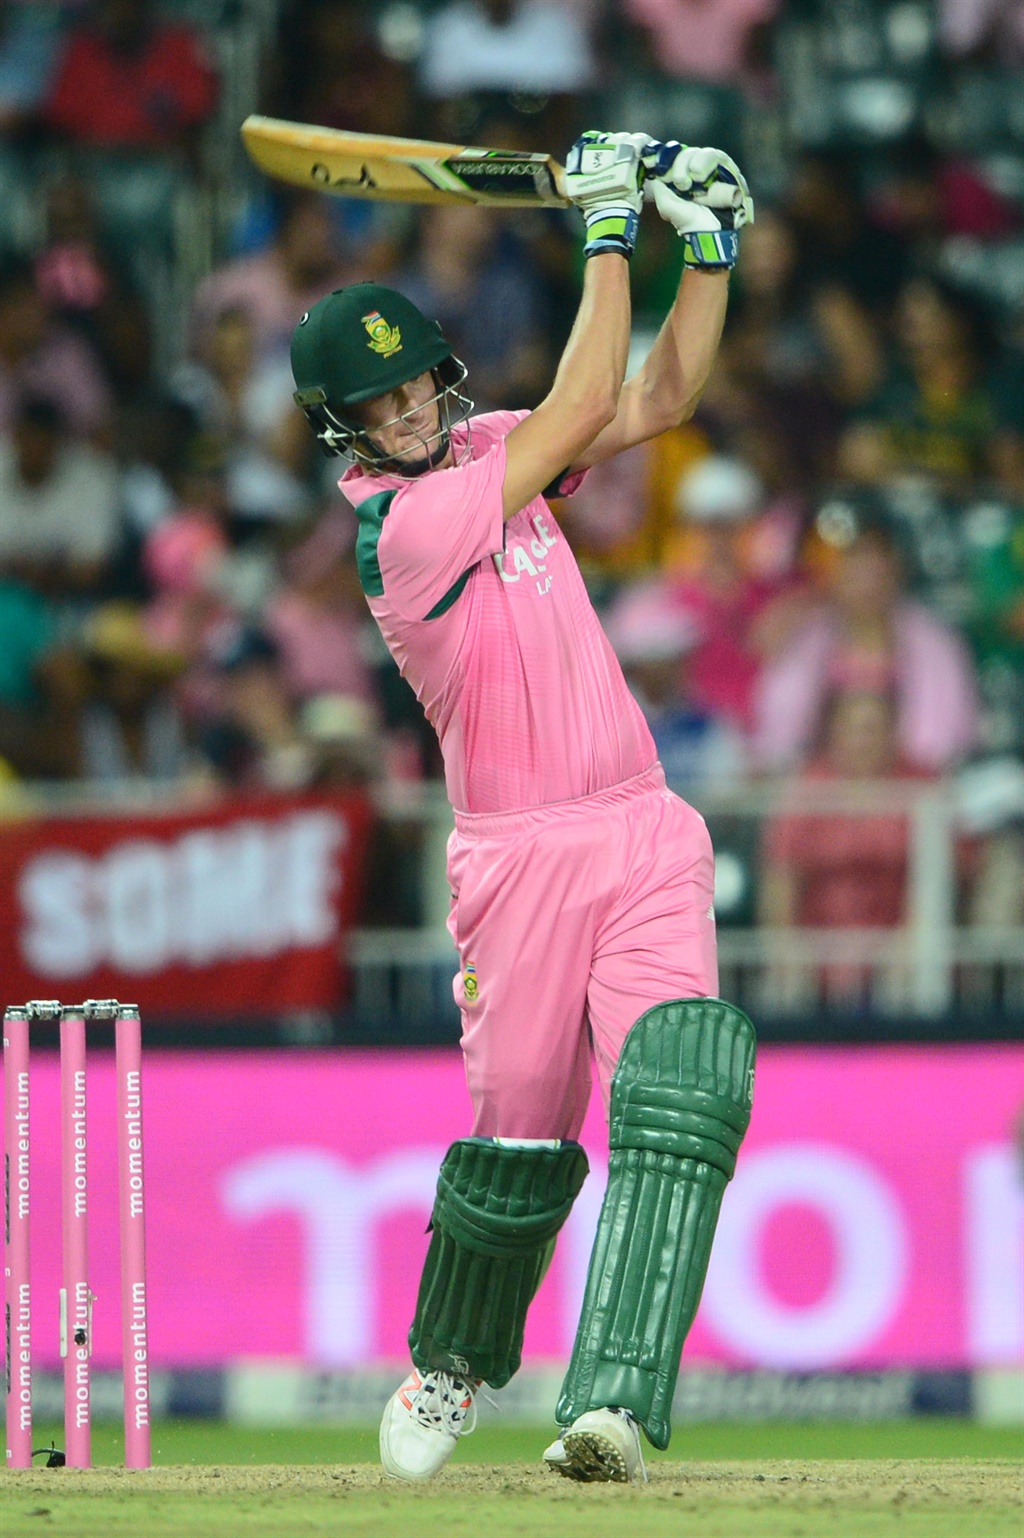 Chris Morris says he appreciates the chance to turn out for the Proteas. He played brilliantly when South Africa beat England in the ODI game at Wanderers on Friday. Picture: Lee Warren / Gallo Images  